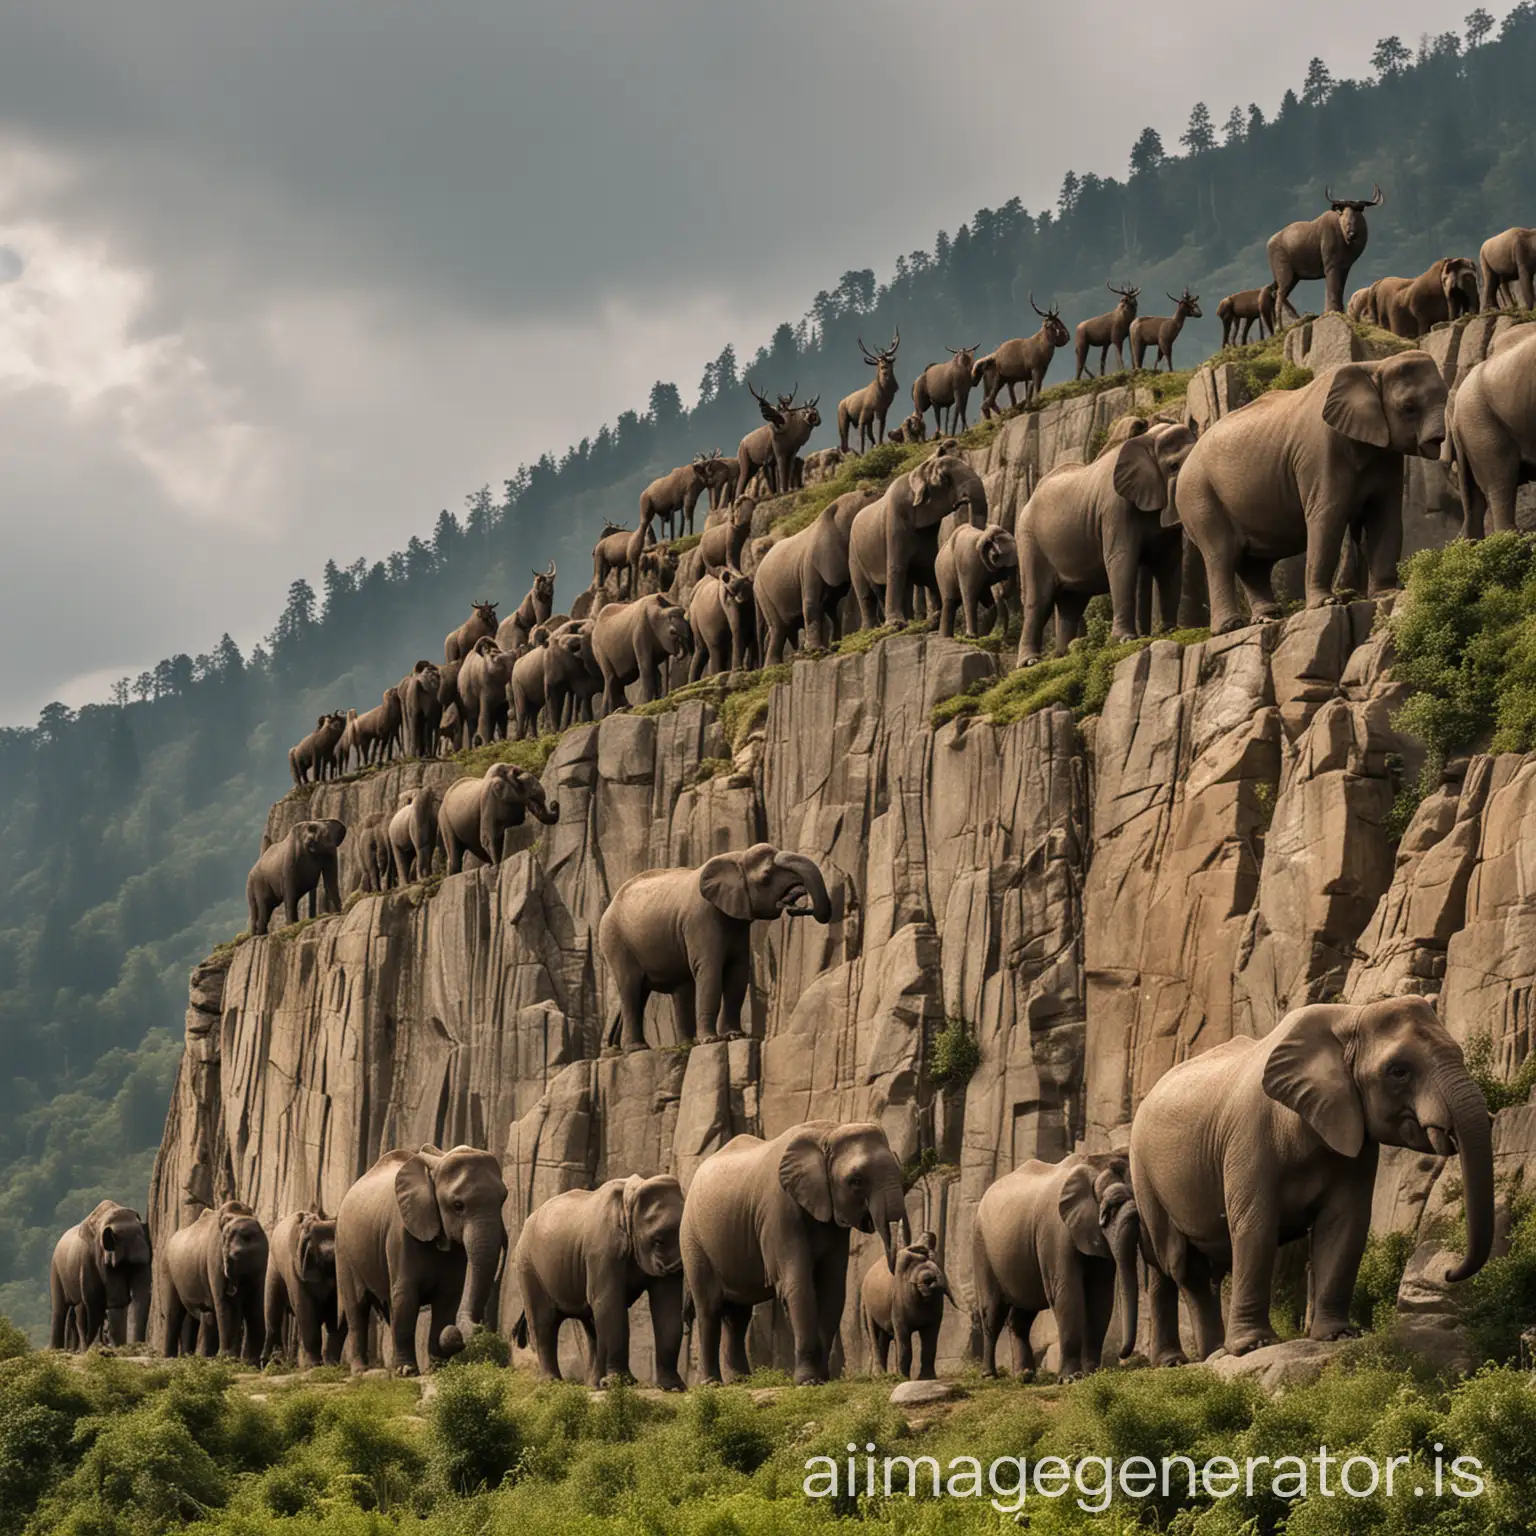 stoic animals gorillas, elephants, and elk sculpted big on a mountainside